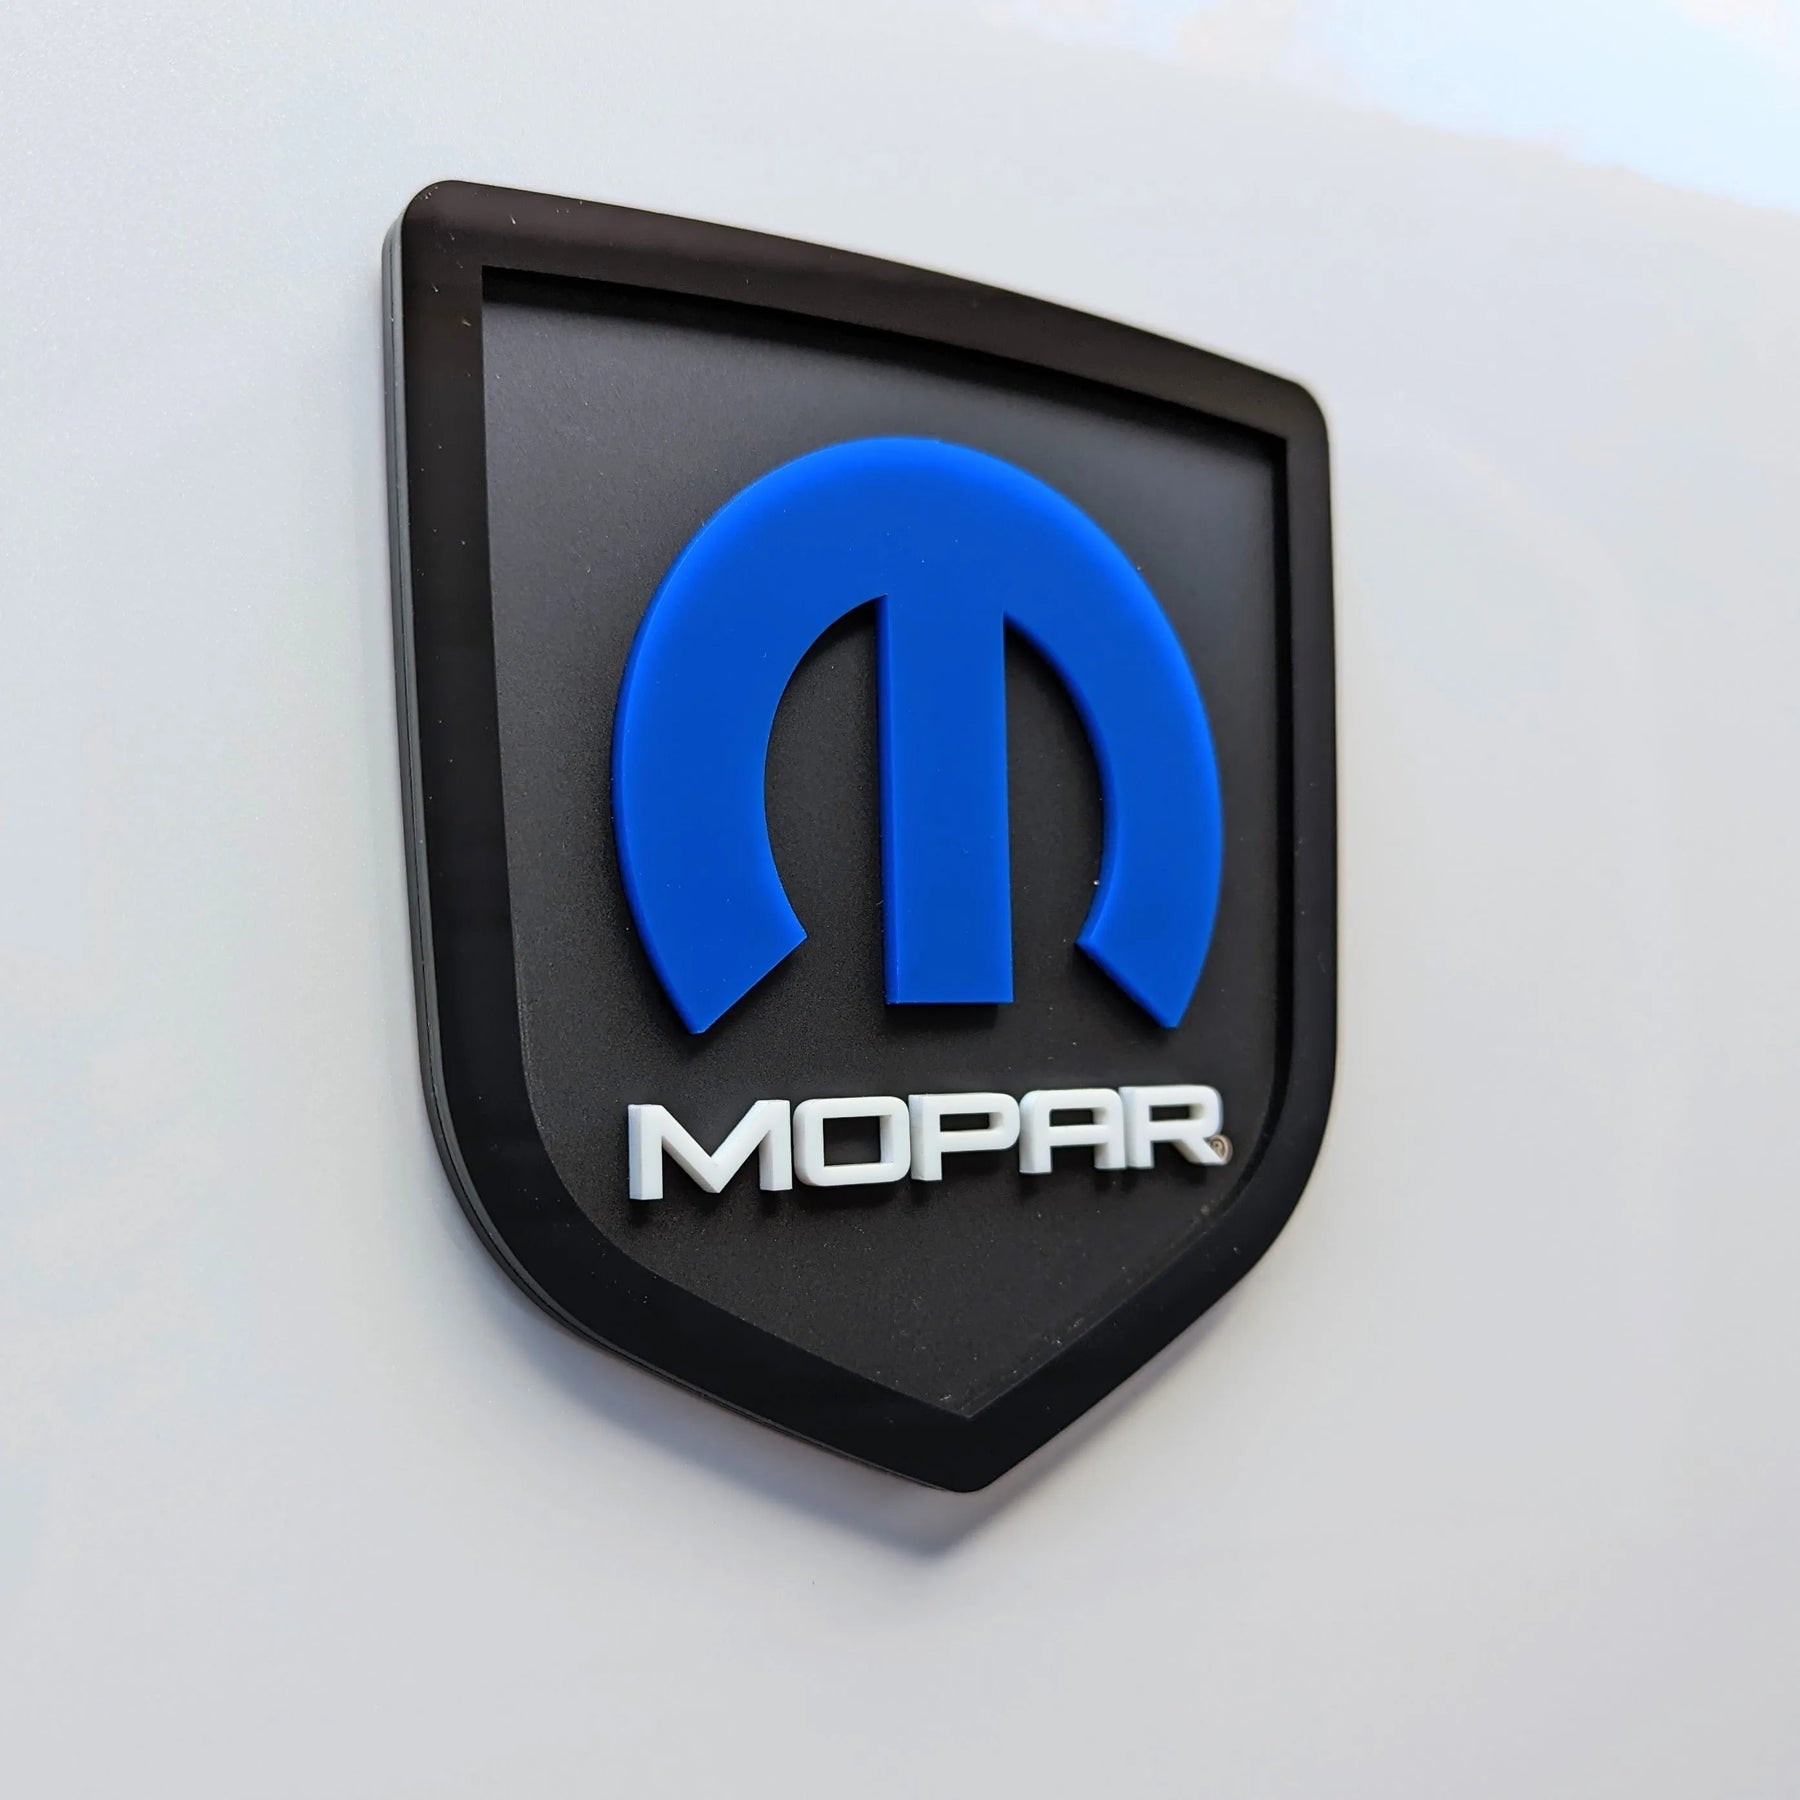 Mopar® Grille and Tailgate Badge Combo - Fits 2013-2018 RAM® - 1500, 2500, 3500 - Officially Licensed Product